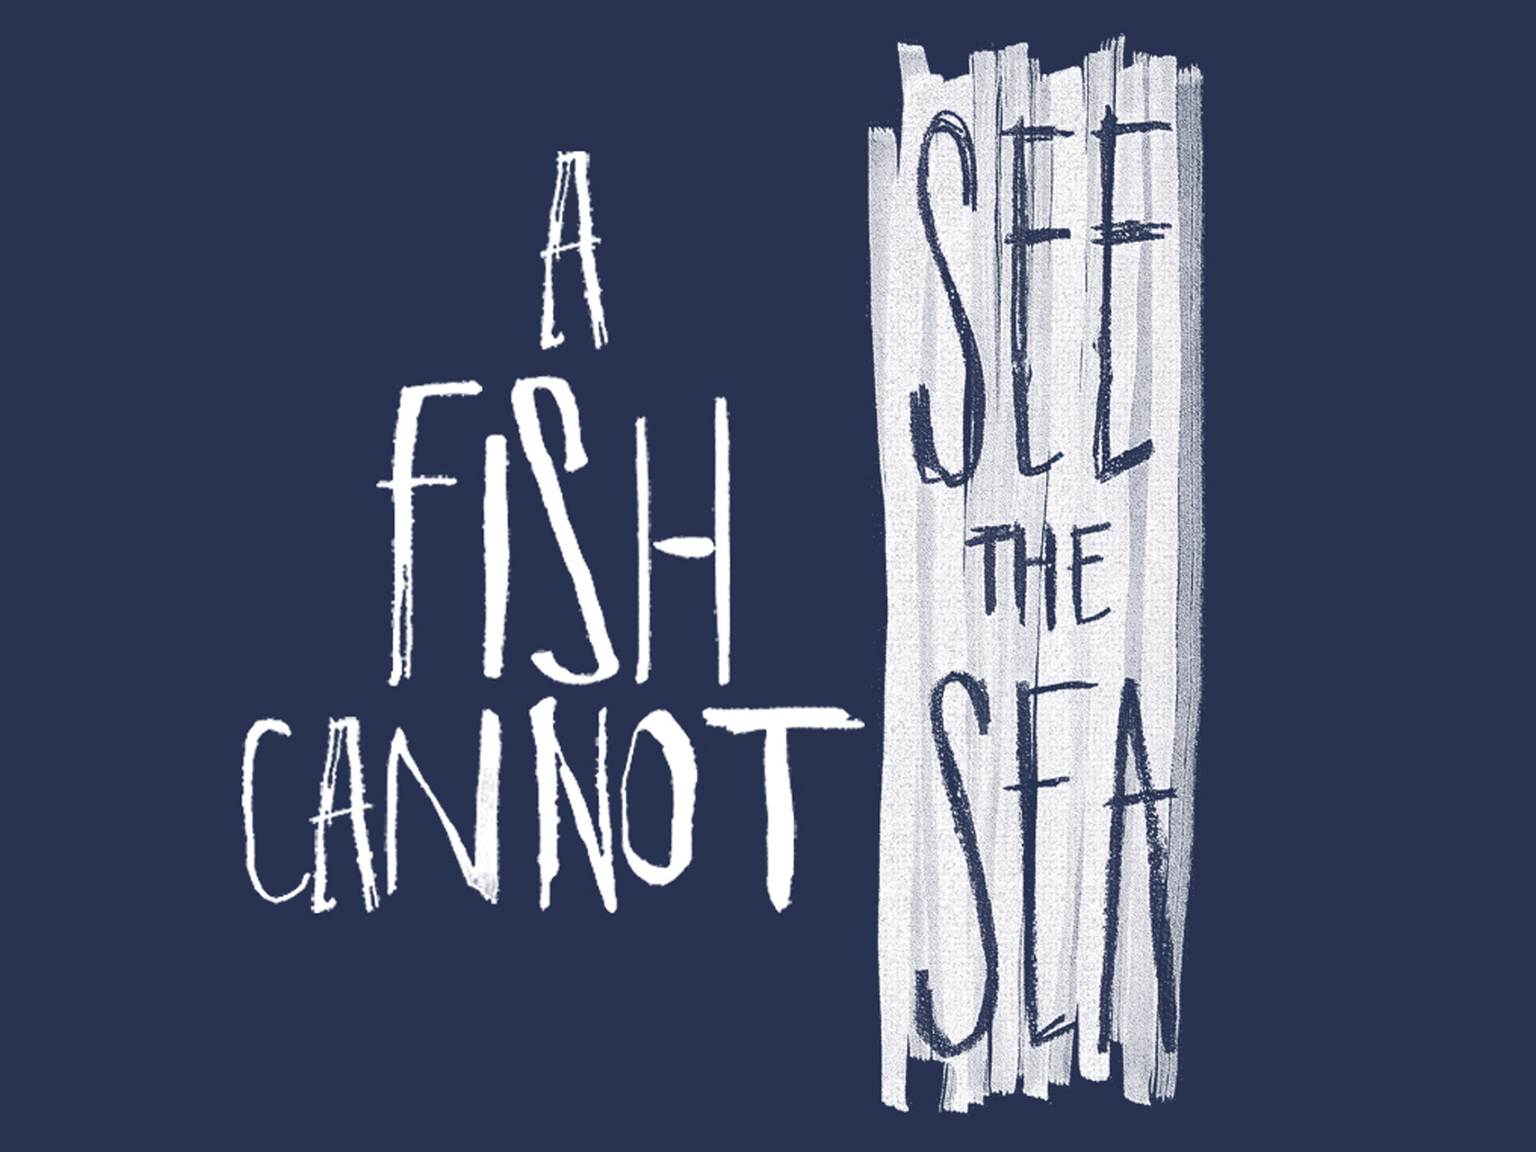 A FISH CANNOT SEE THE SEA